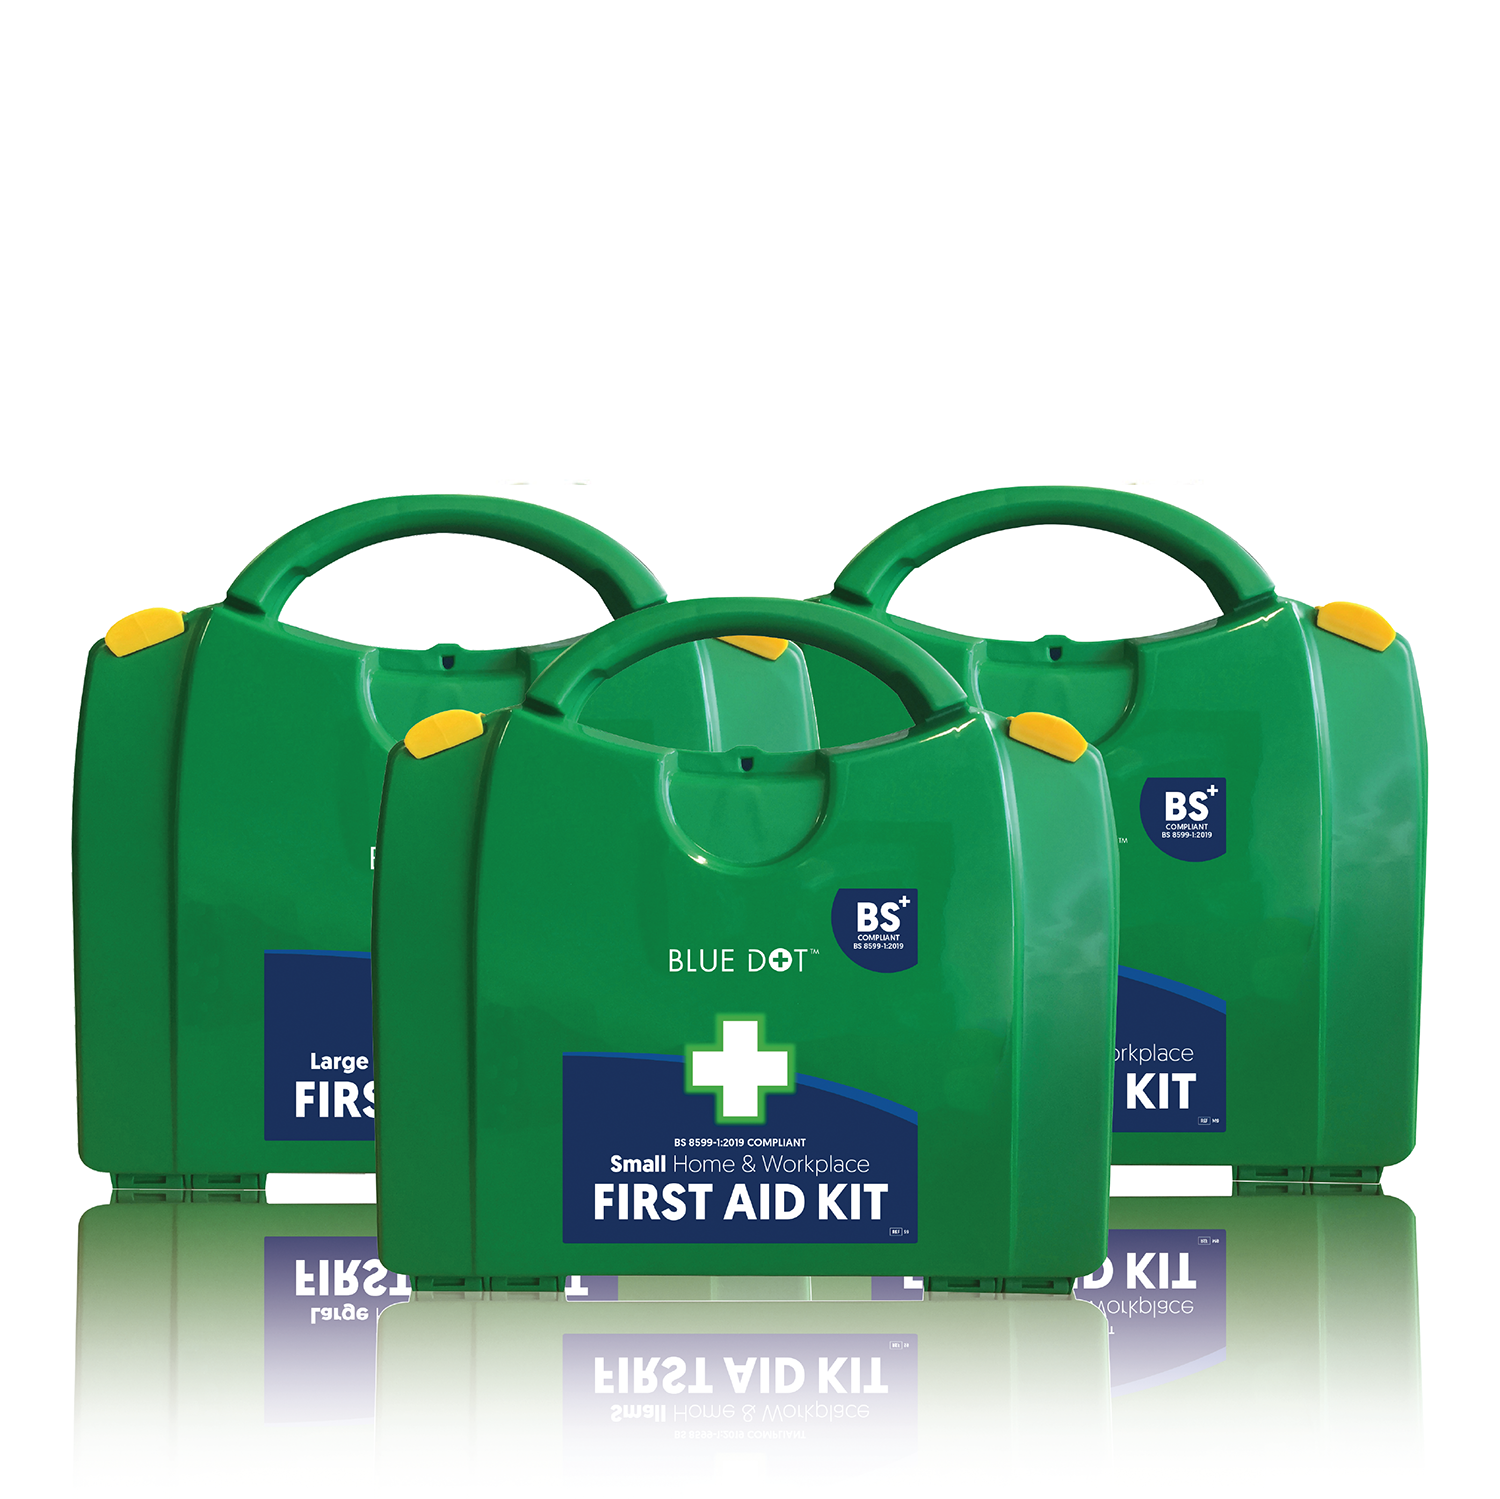 Blue Dot Home & Workplace First Aid Kit BS 8599-1 (2019) | Medium | Single